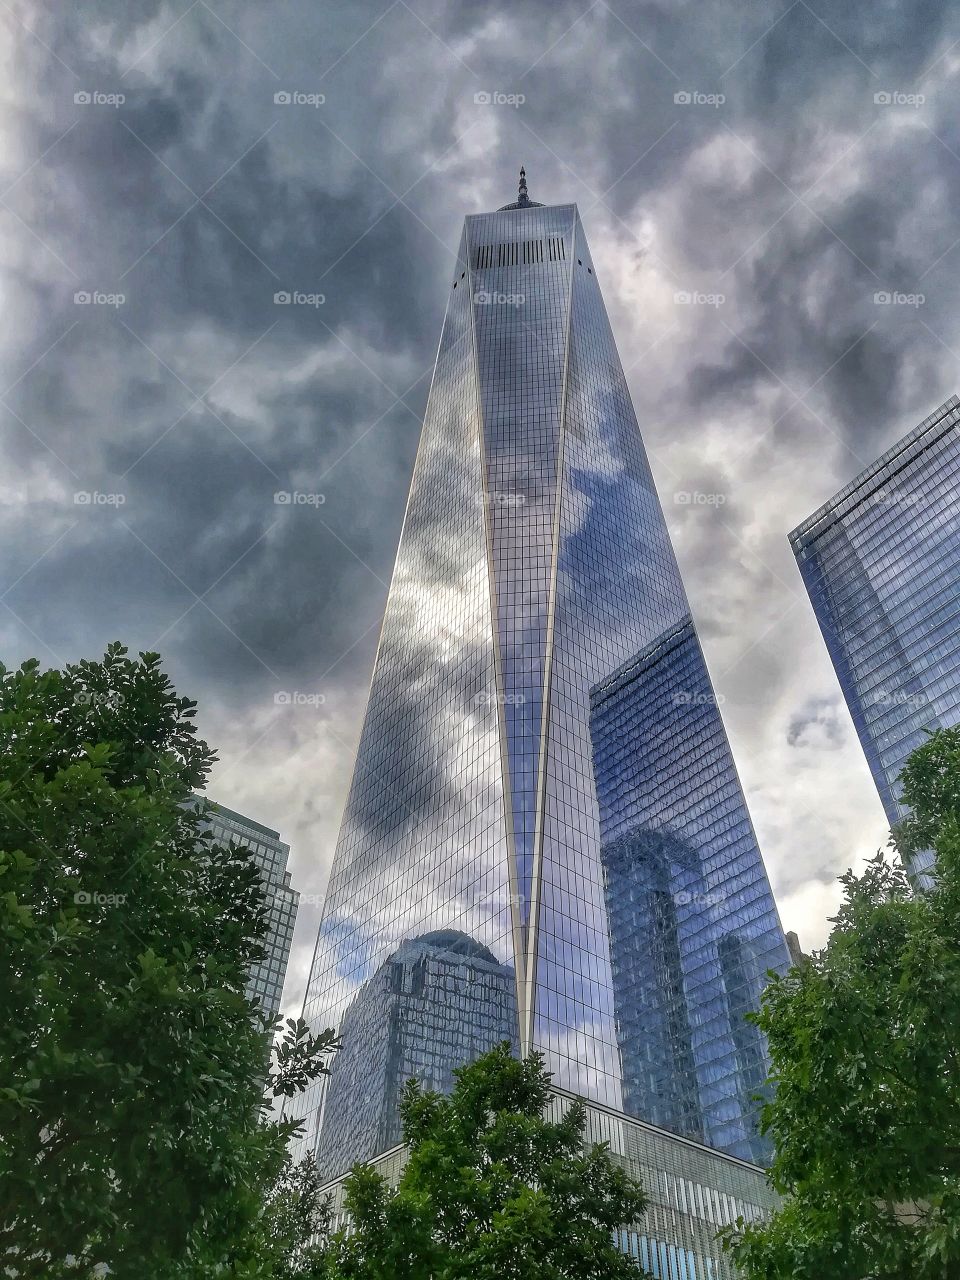 Freedom tower new york. Structure. Manhattan. Glass. Reflections. Tourist. Sky. Clouds